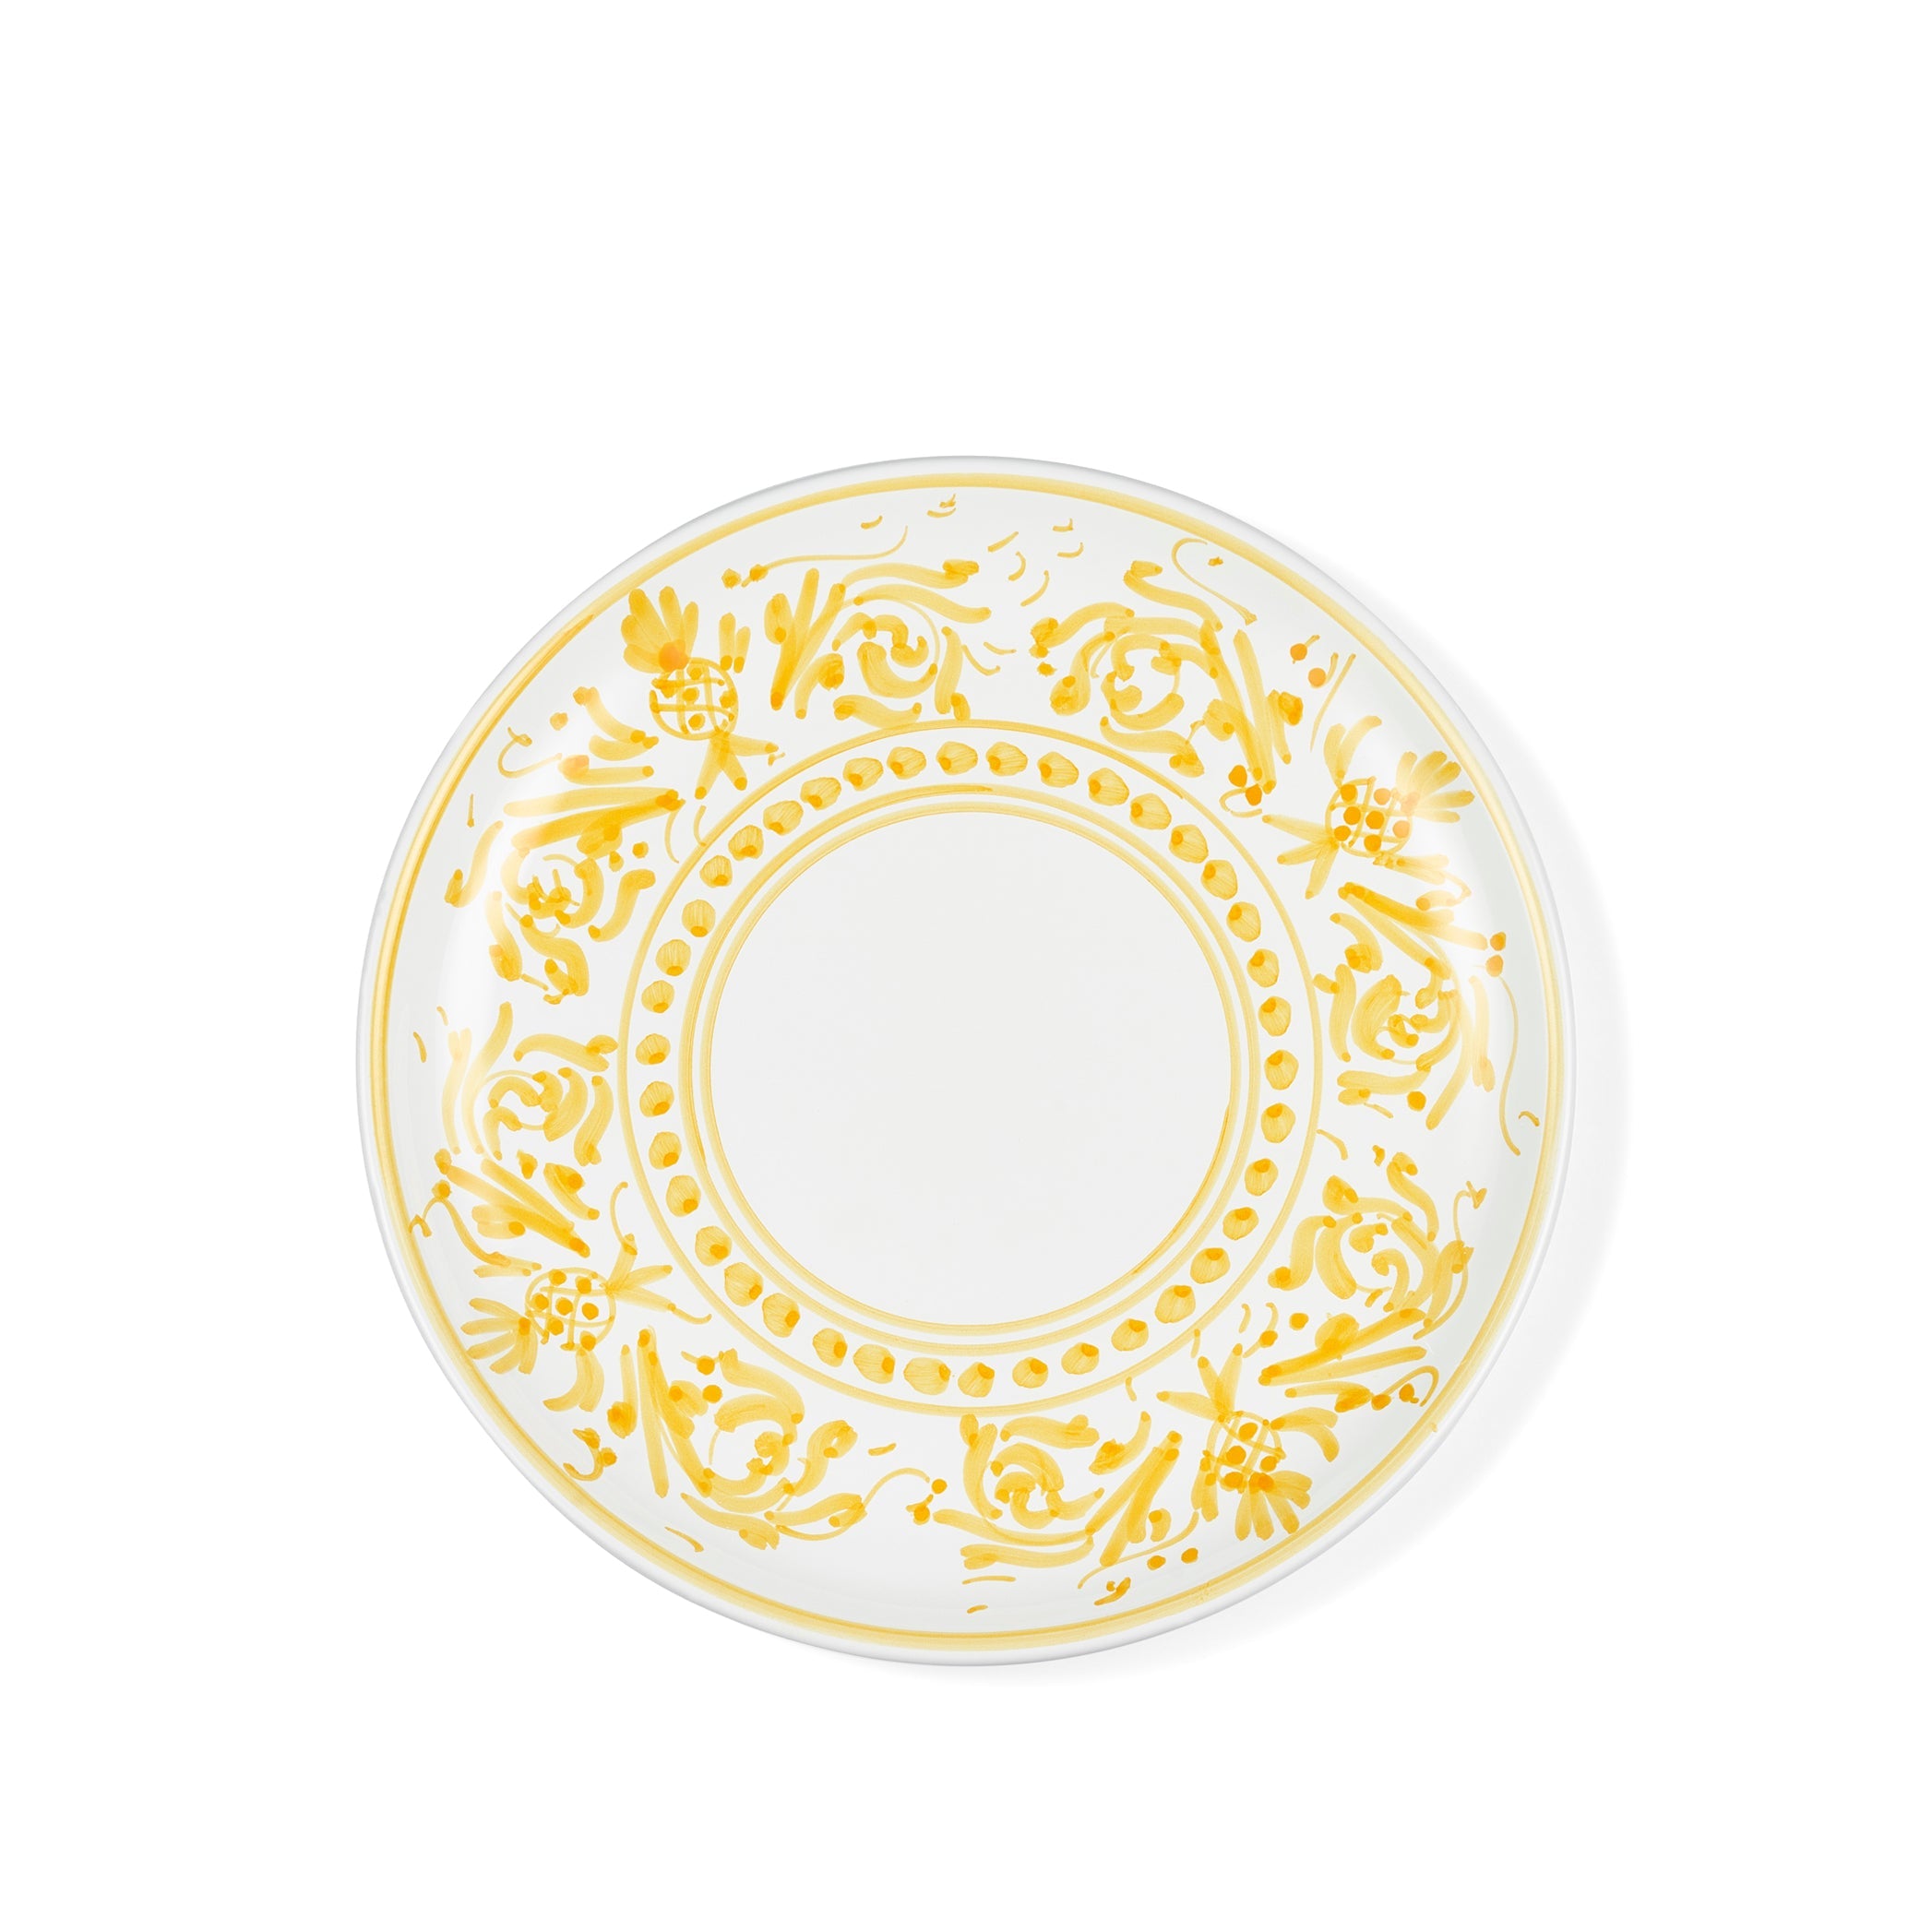 S&B Decorated Dinner Plate in White With Yellow Pattern, 26cm